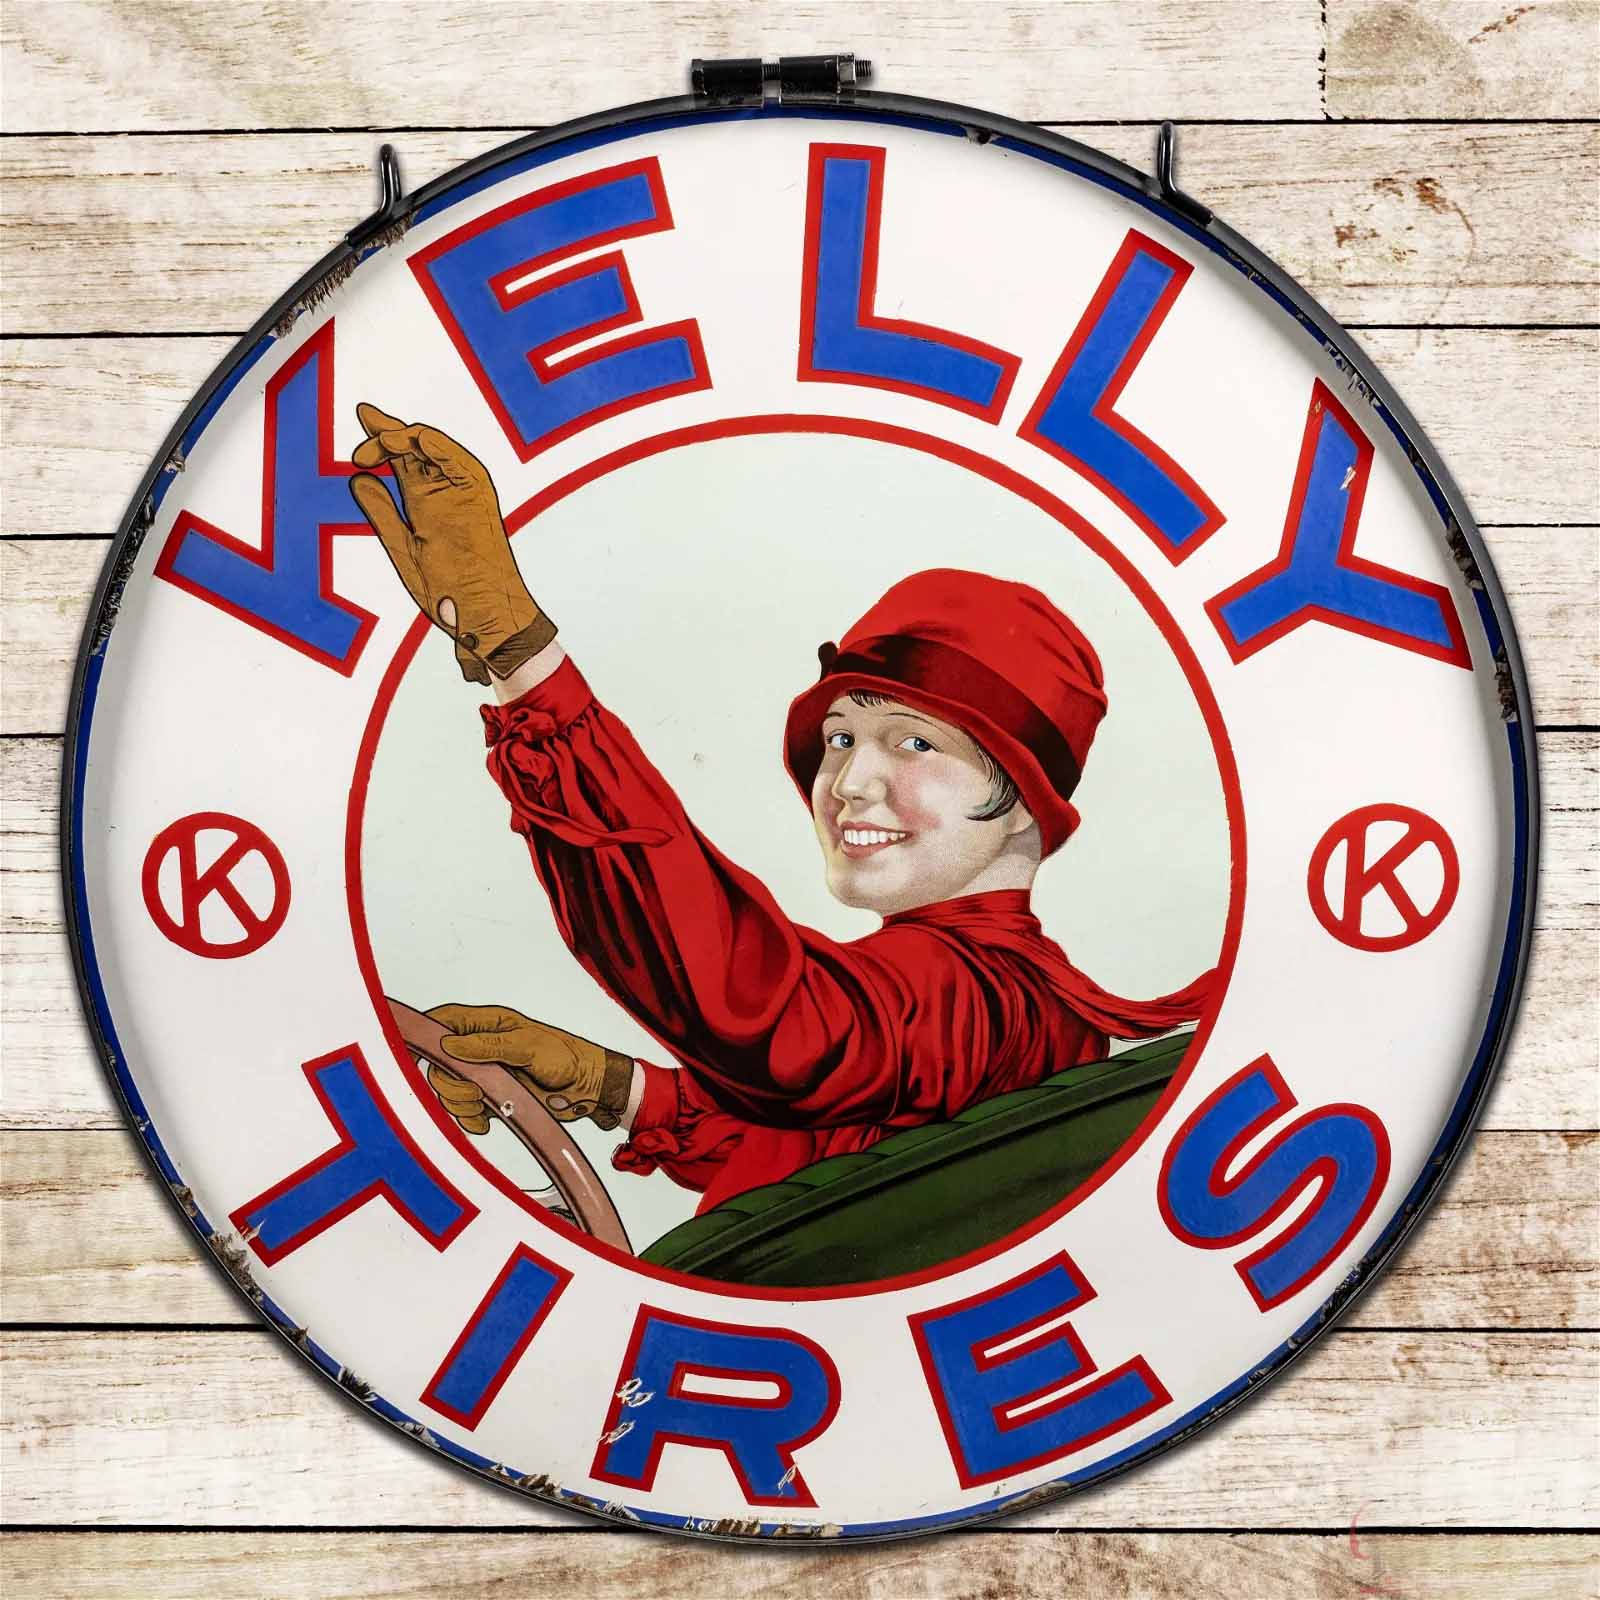 Kelly Tires single-sided 42in porcelain sign featuring the Lotta Miles character, which sold for $100,000 ($120,000 with buyer’s premium) at Richmond.